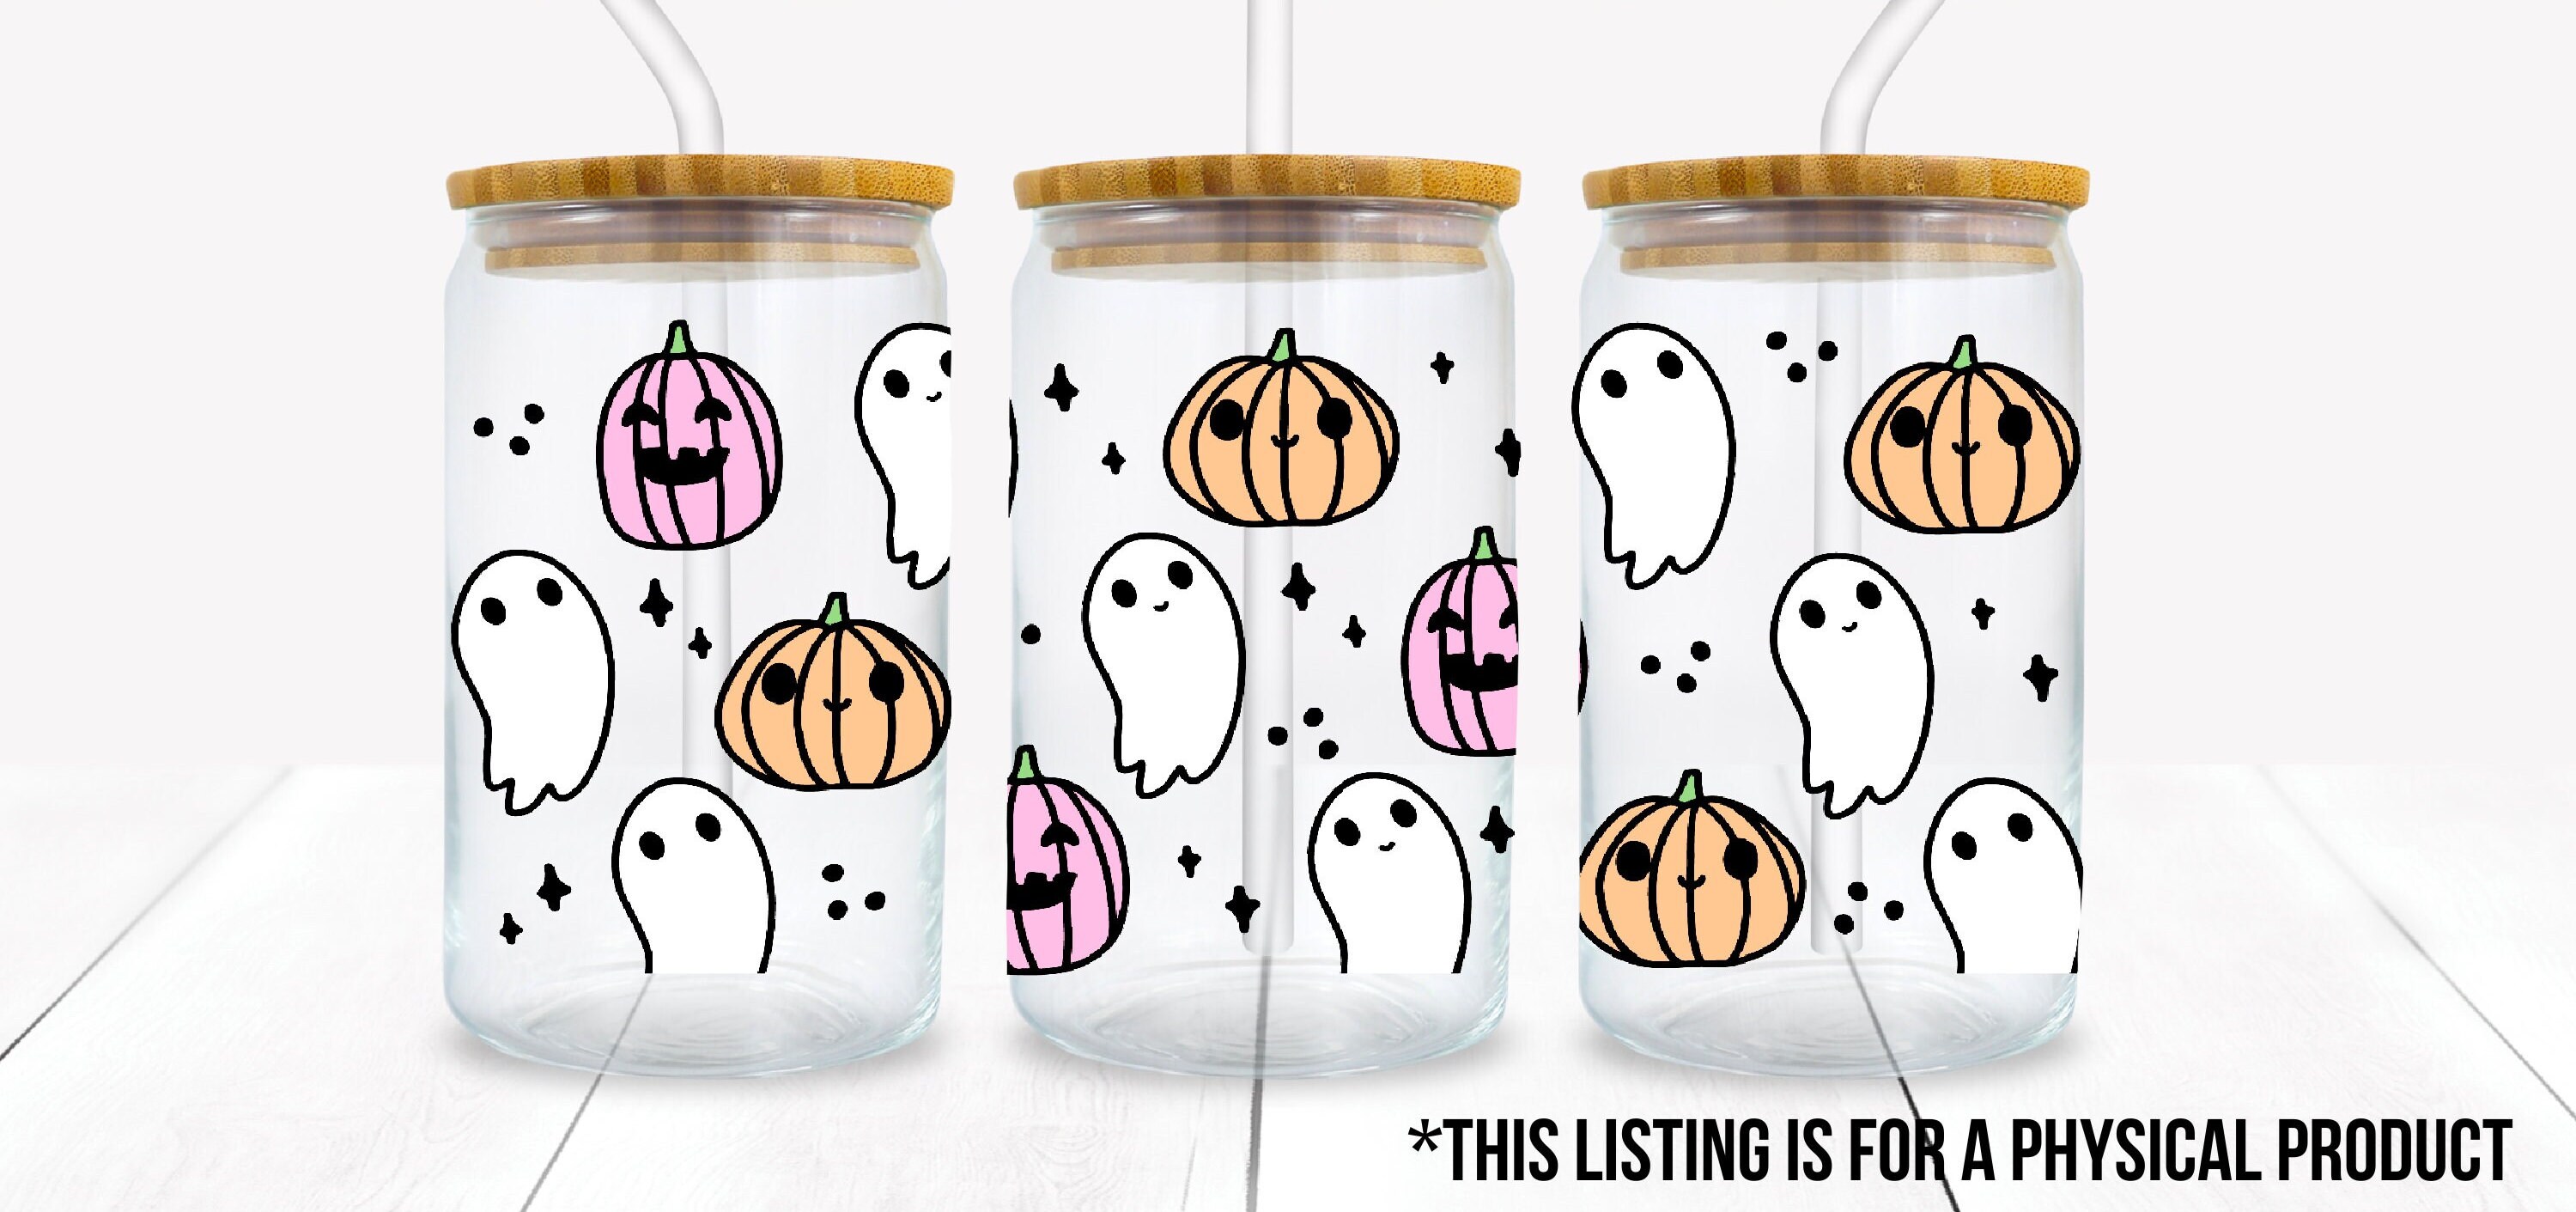 Halloween UV DTF Cup Wrap, Pumpkin Cup Wrap, Uv Dtf Decals, Stickers for  Glass Can, Ready to Use Cup Wrap 